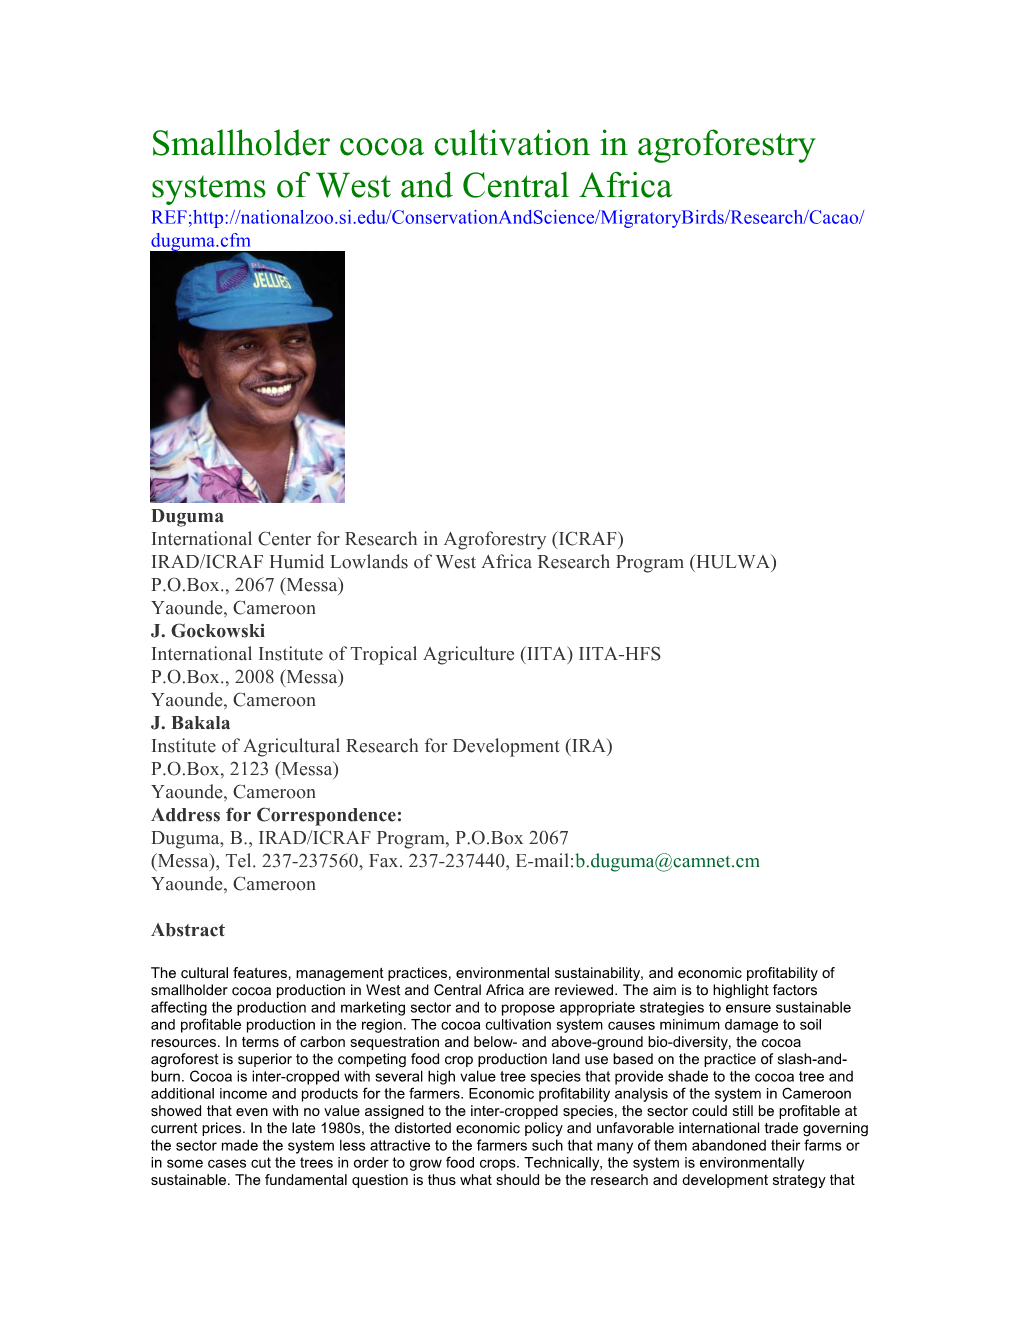 Smallholder Cocoa Cultivation in Agroforestry Systems of West and Central Africa